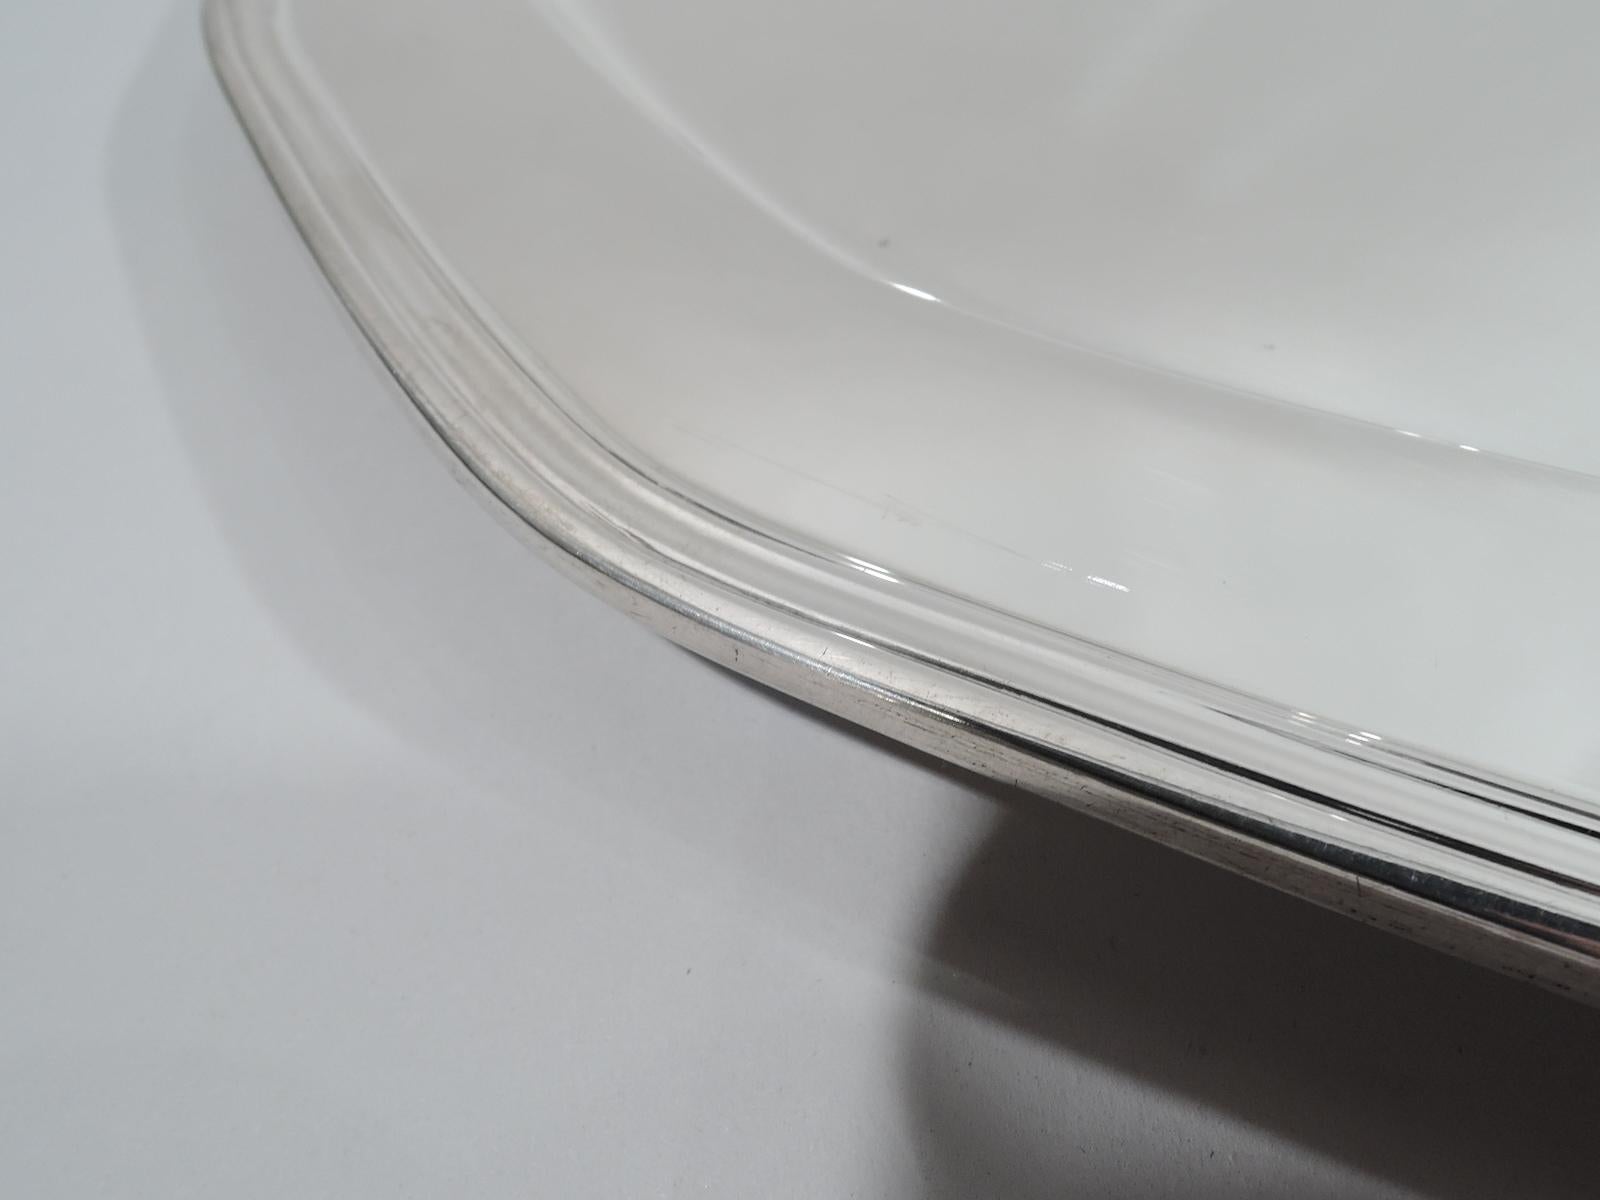 Art Deco sterling silver tray. Made by Tiffany & Co. in New York, ca 1926. Faceted with deep well and molded rim. Fully marked including pattern no. 20774 (first produced in 1926) and director’s letter m. Heavy weight: 26 troy ounces.